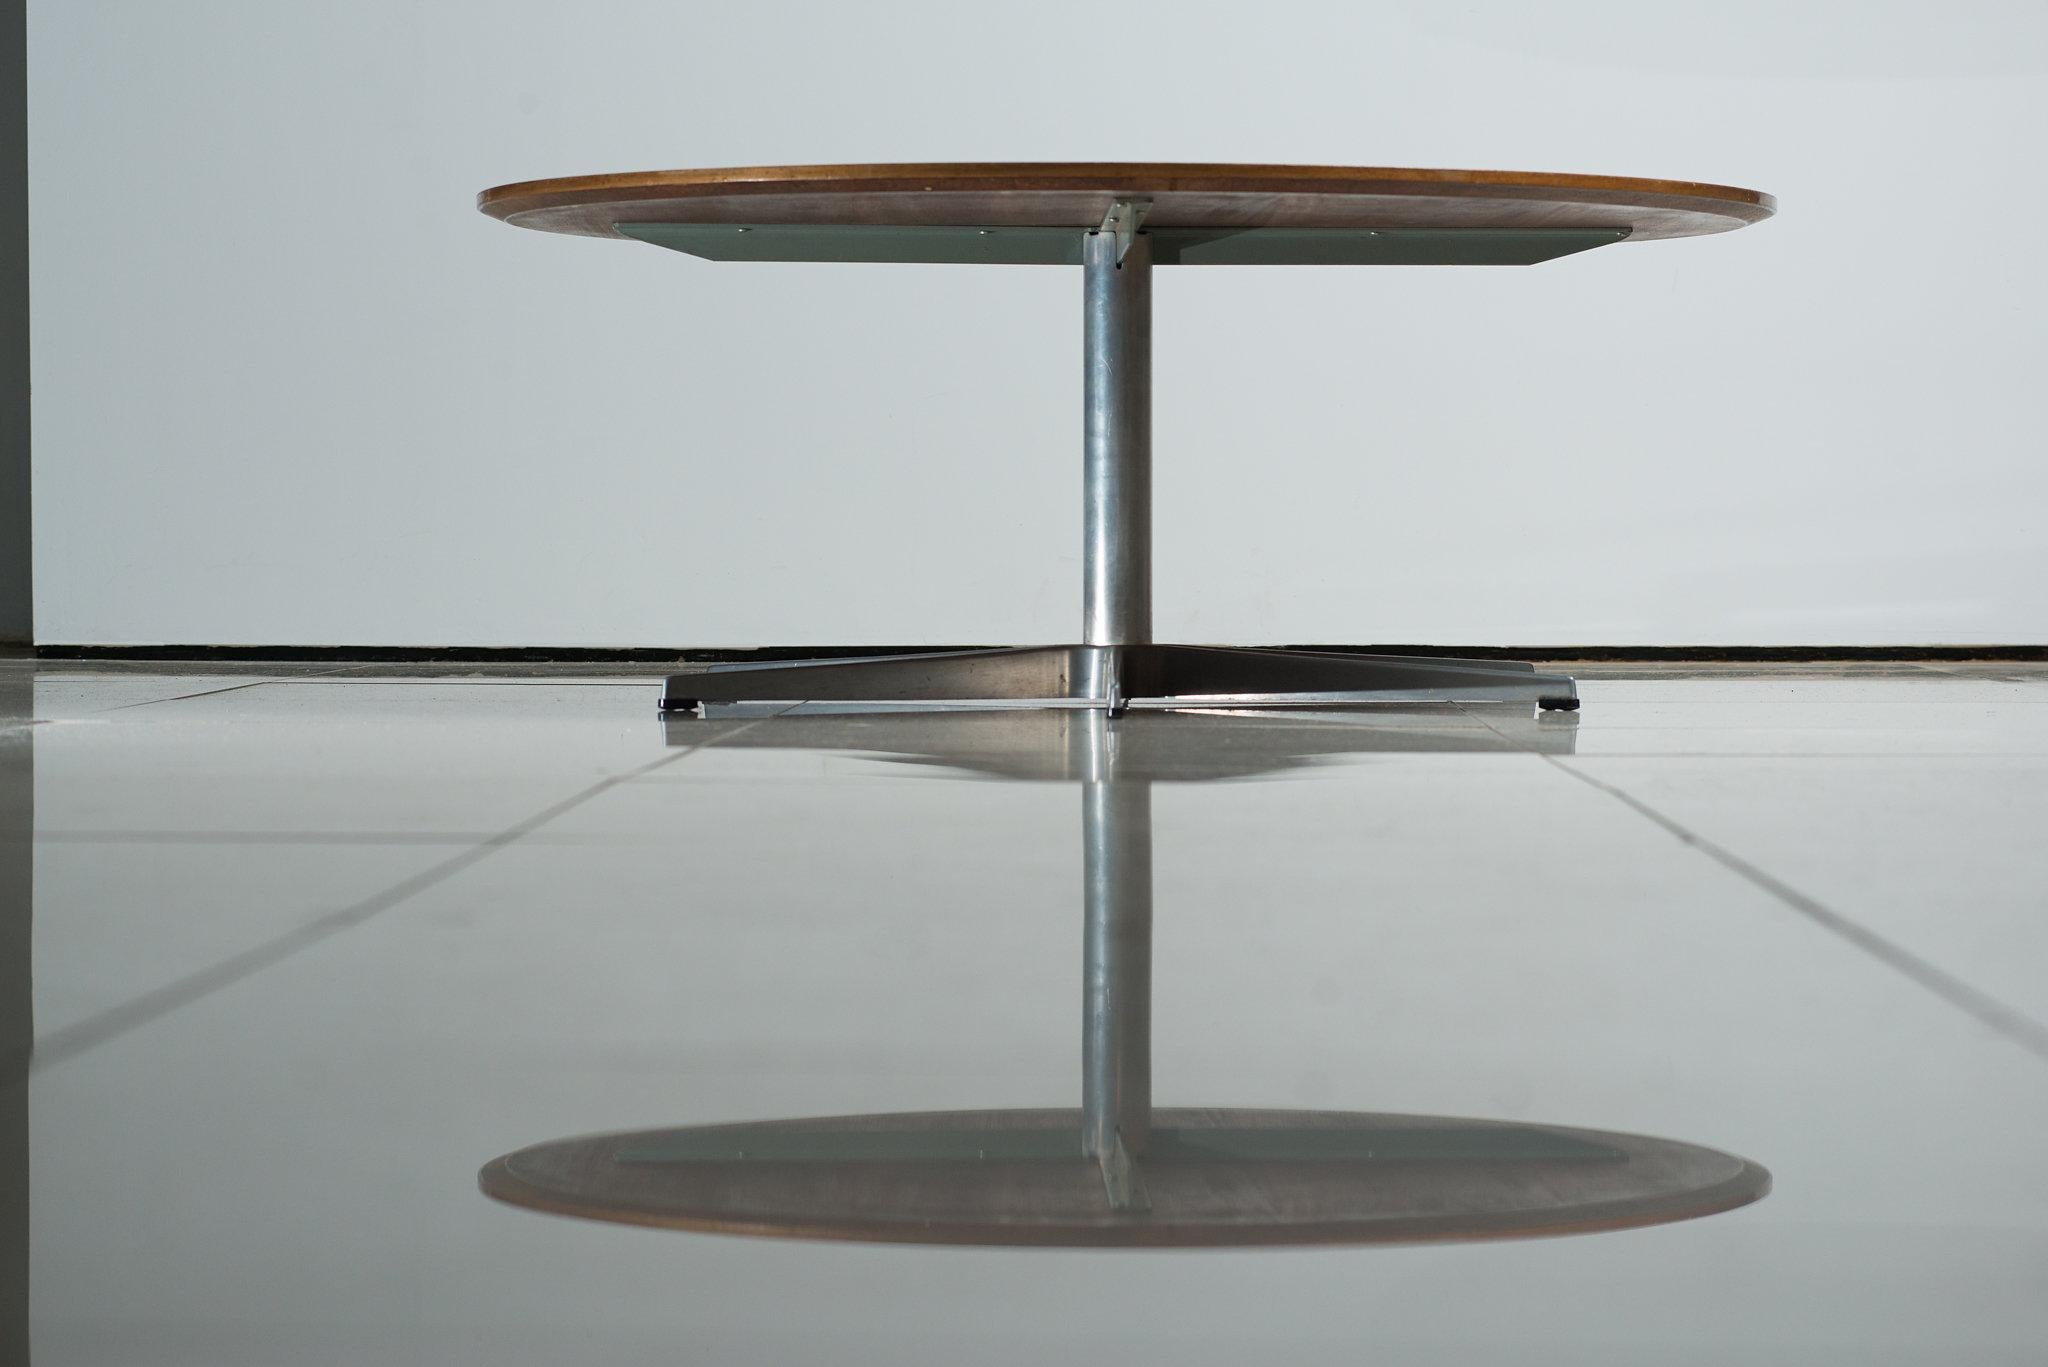 A rare 6 spoke model 3514 rosewood coffee table by Arne Jacobsen. Part of the ‘Six-Star Series’ for Fritz Hansen, Denmark. Designed in 1968 this example dates from February 1971.